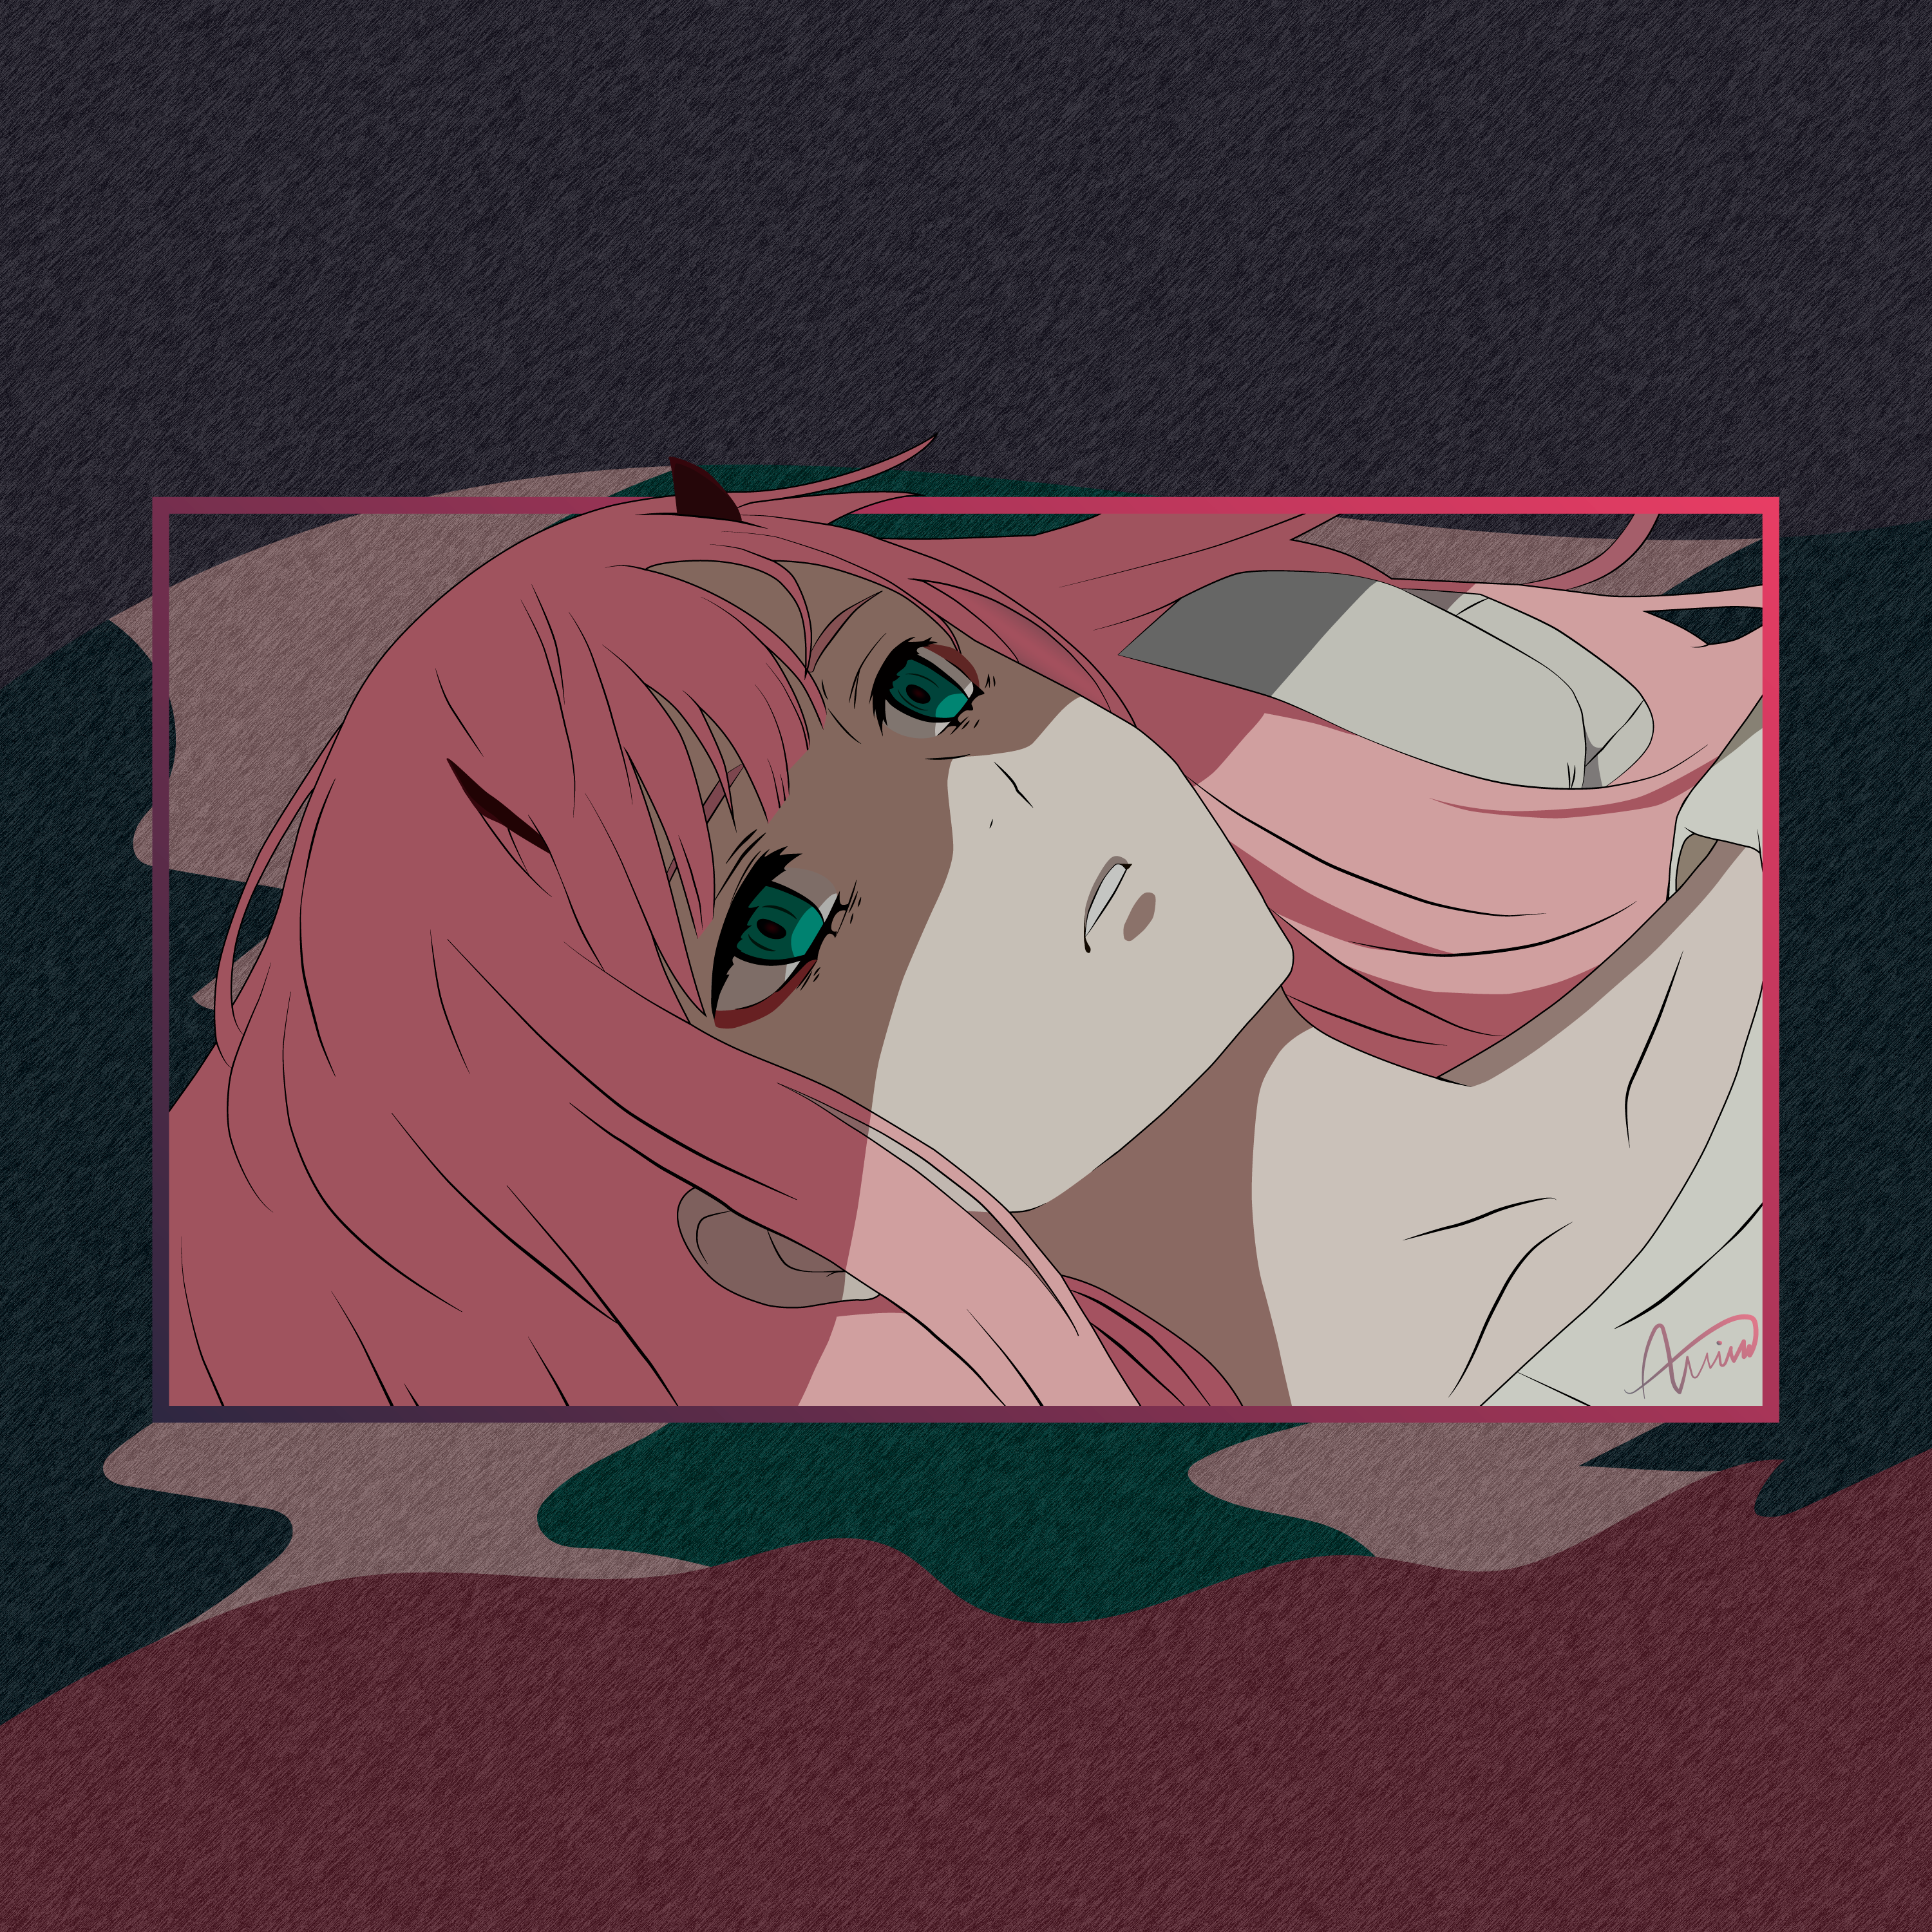 Anime Anime Girls Zero Two Darling In The FranXX Code 002 Square Pink Hair Horns 3000x3000